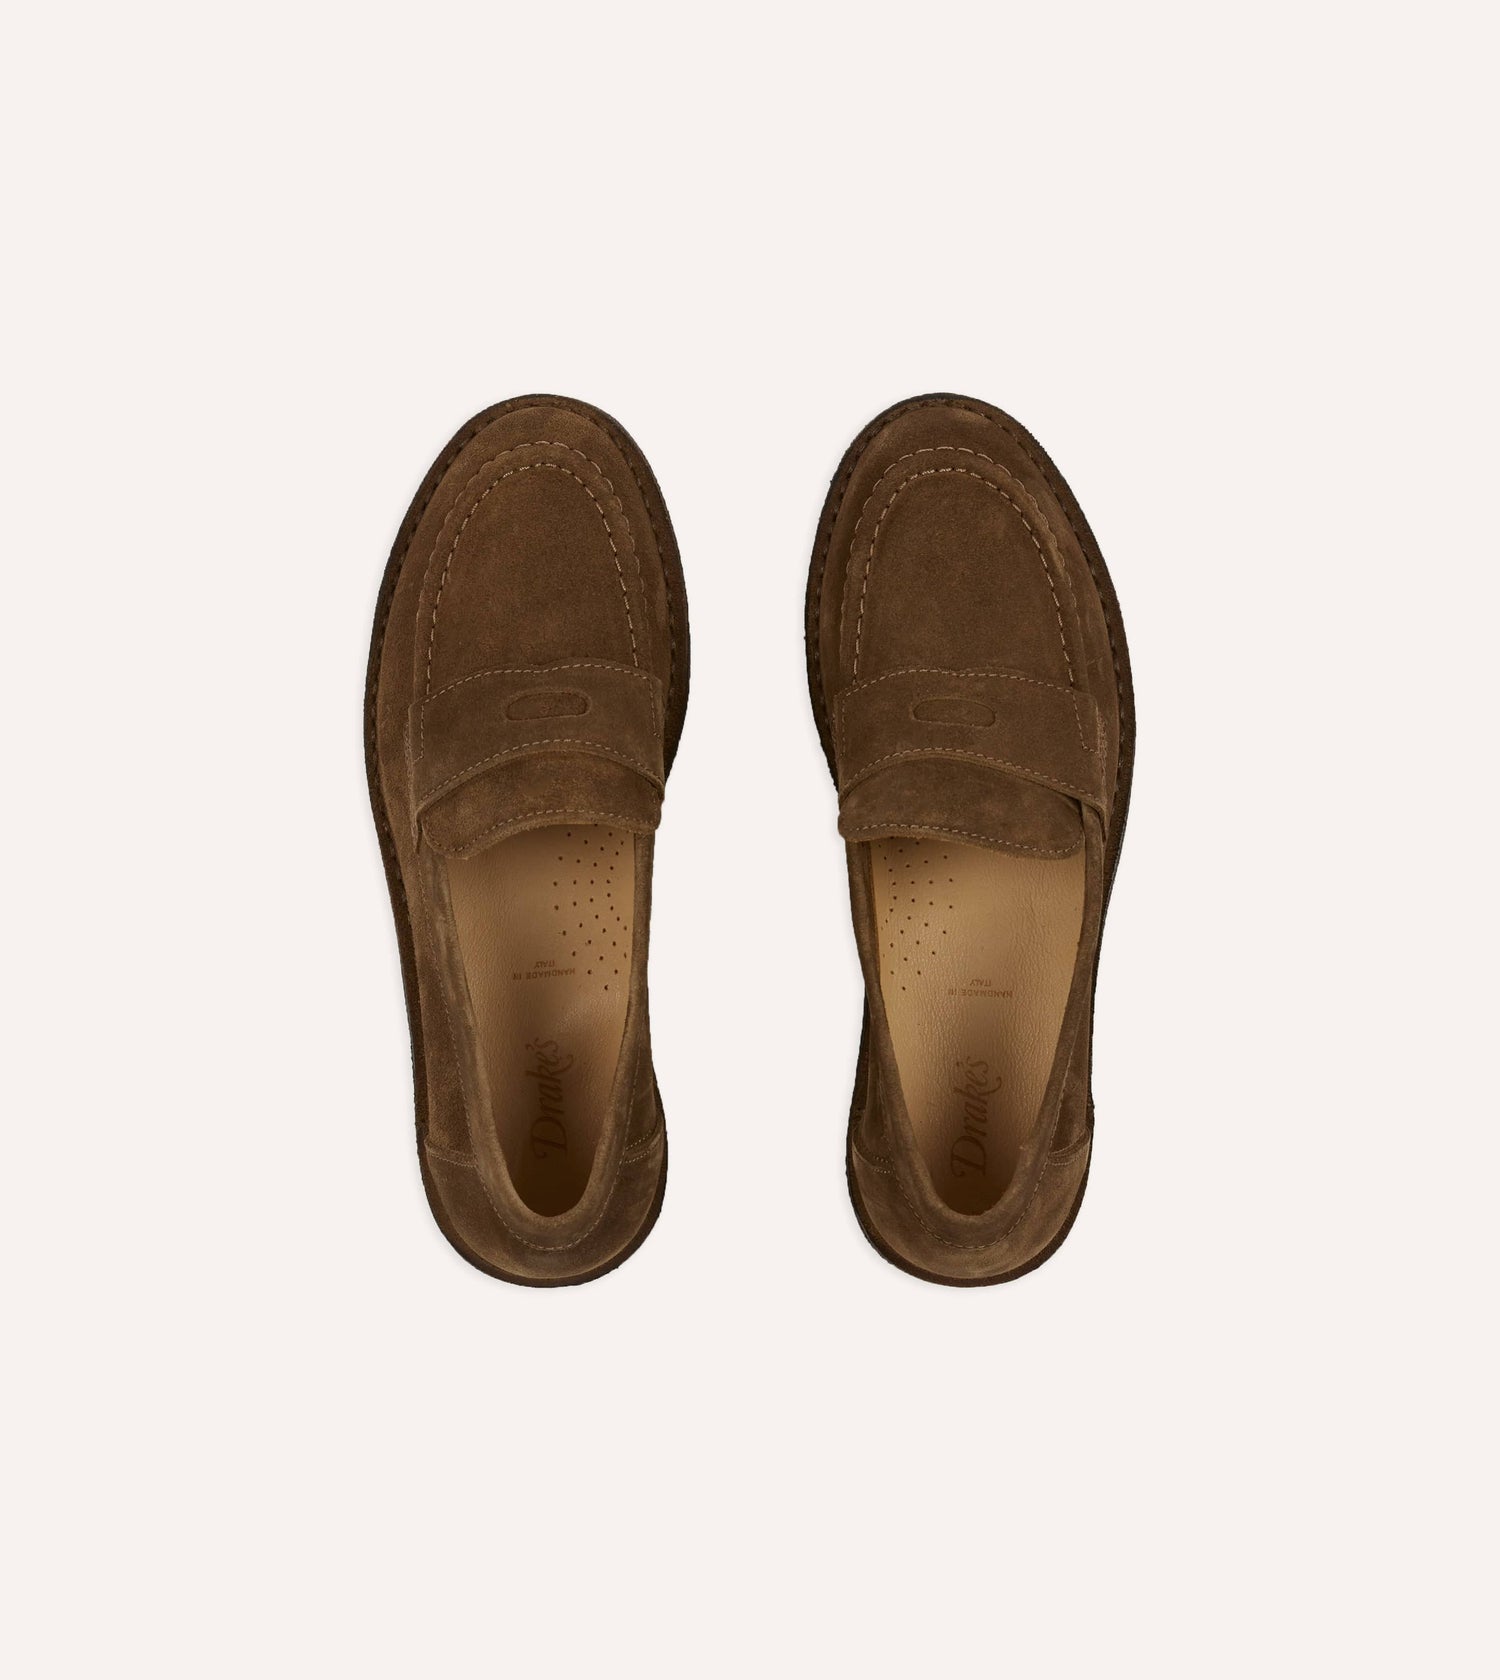 Tobacco Suede Canal Penny Loafer with Crepe Sole